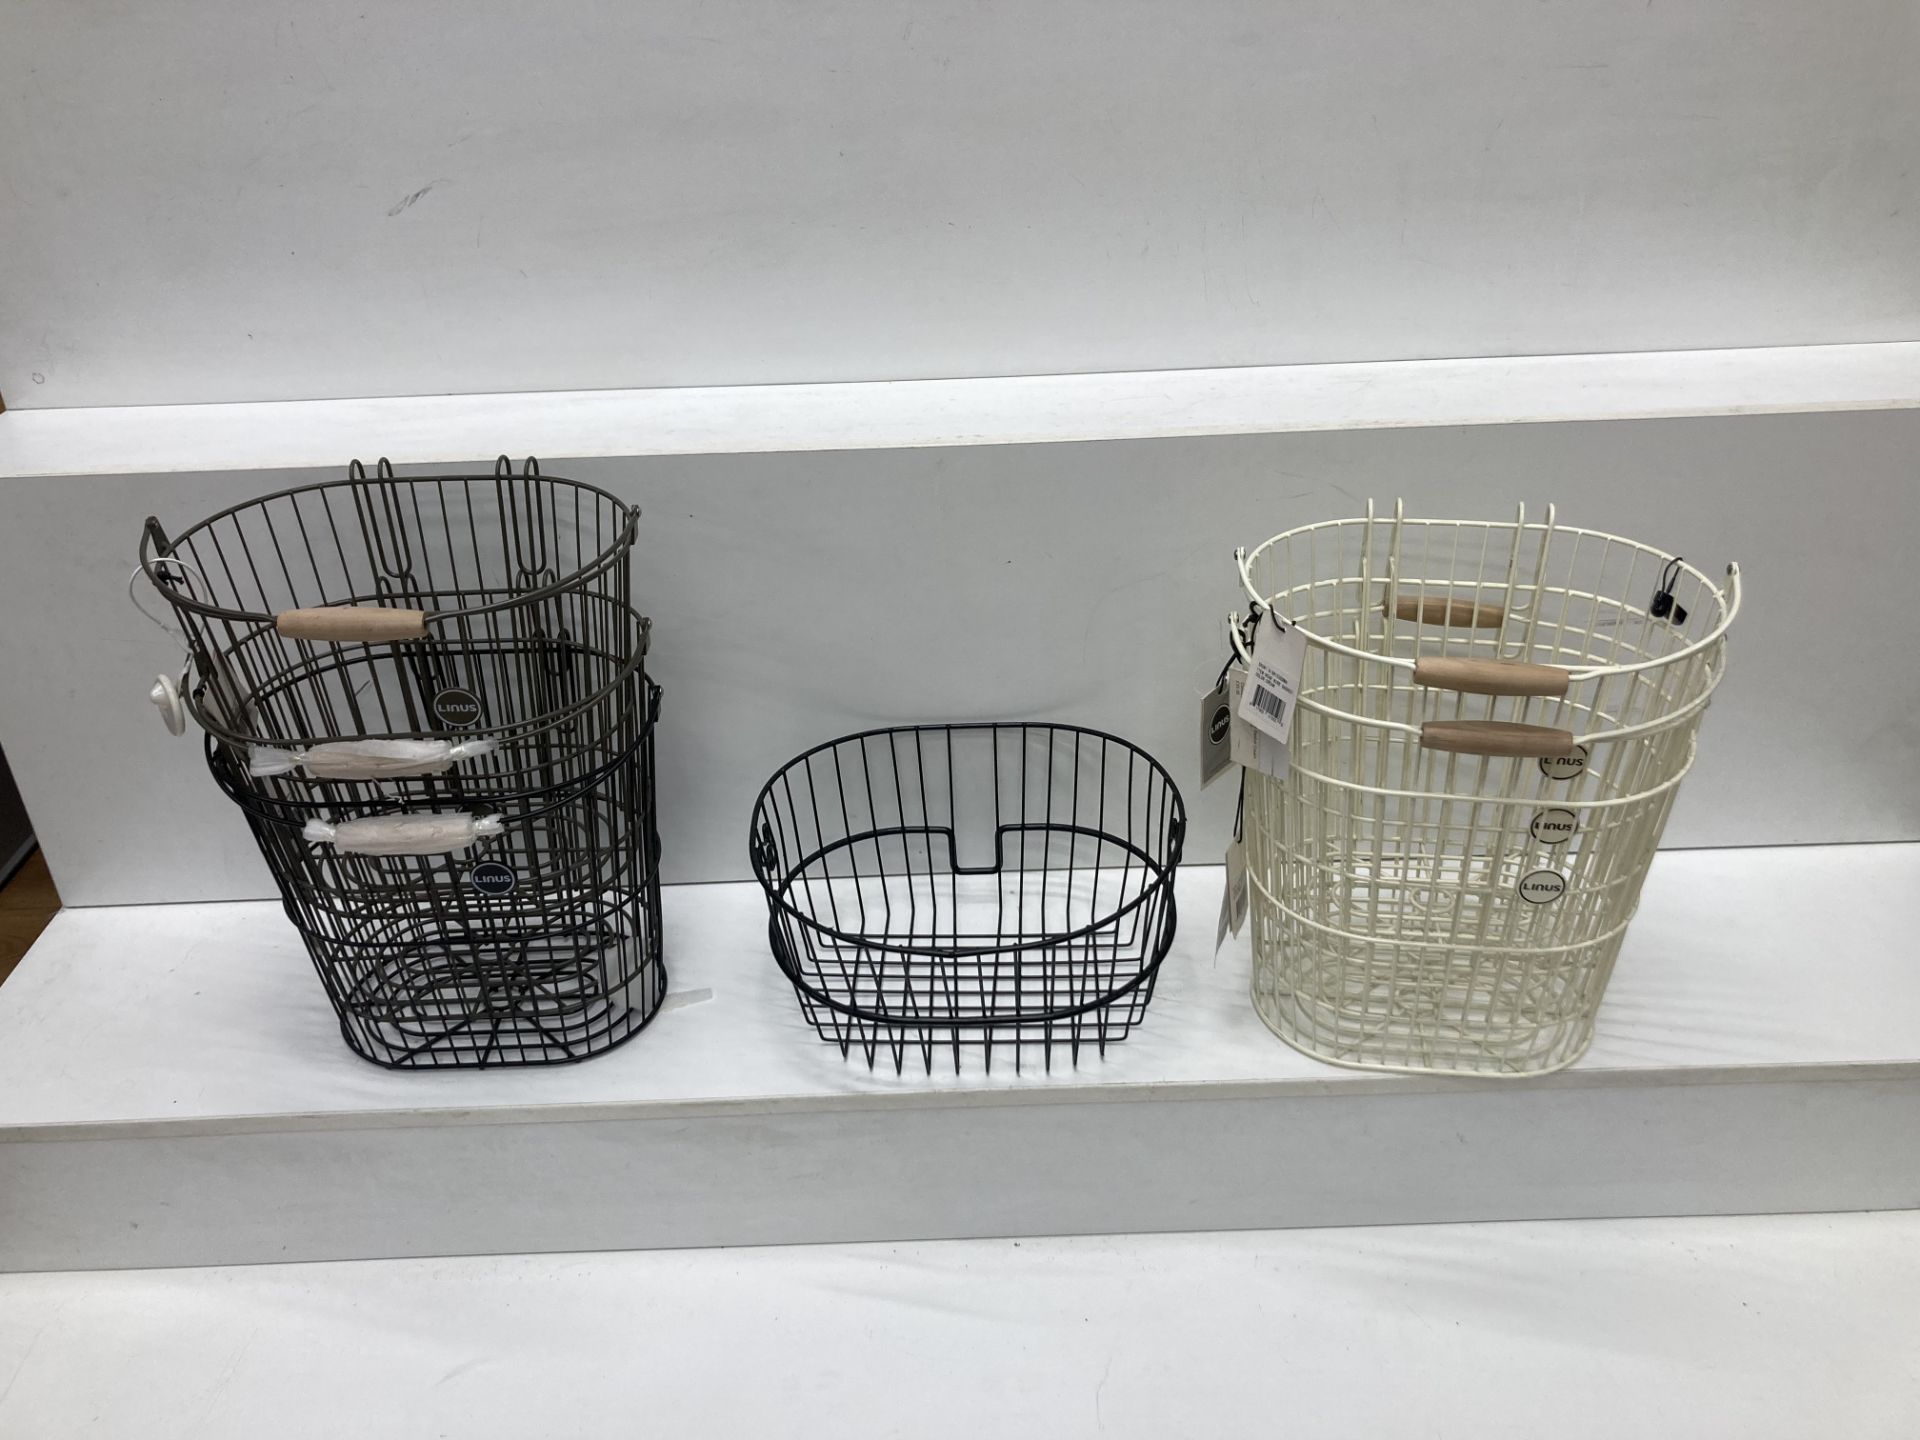 7 x Linus cycle baskets - Image 2 of 2